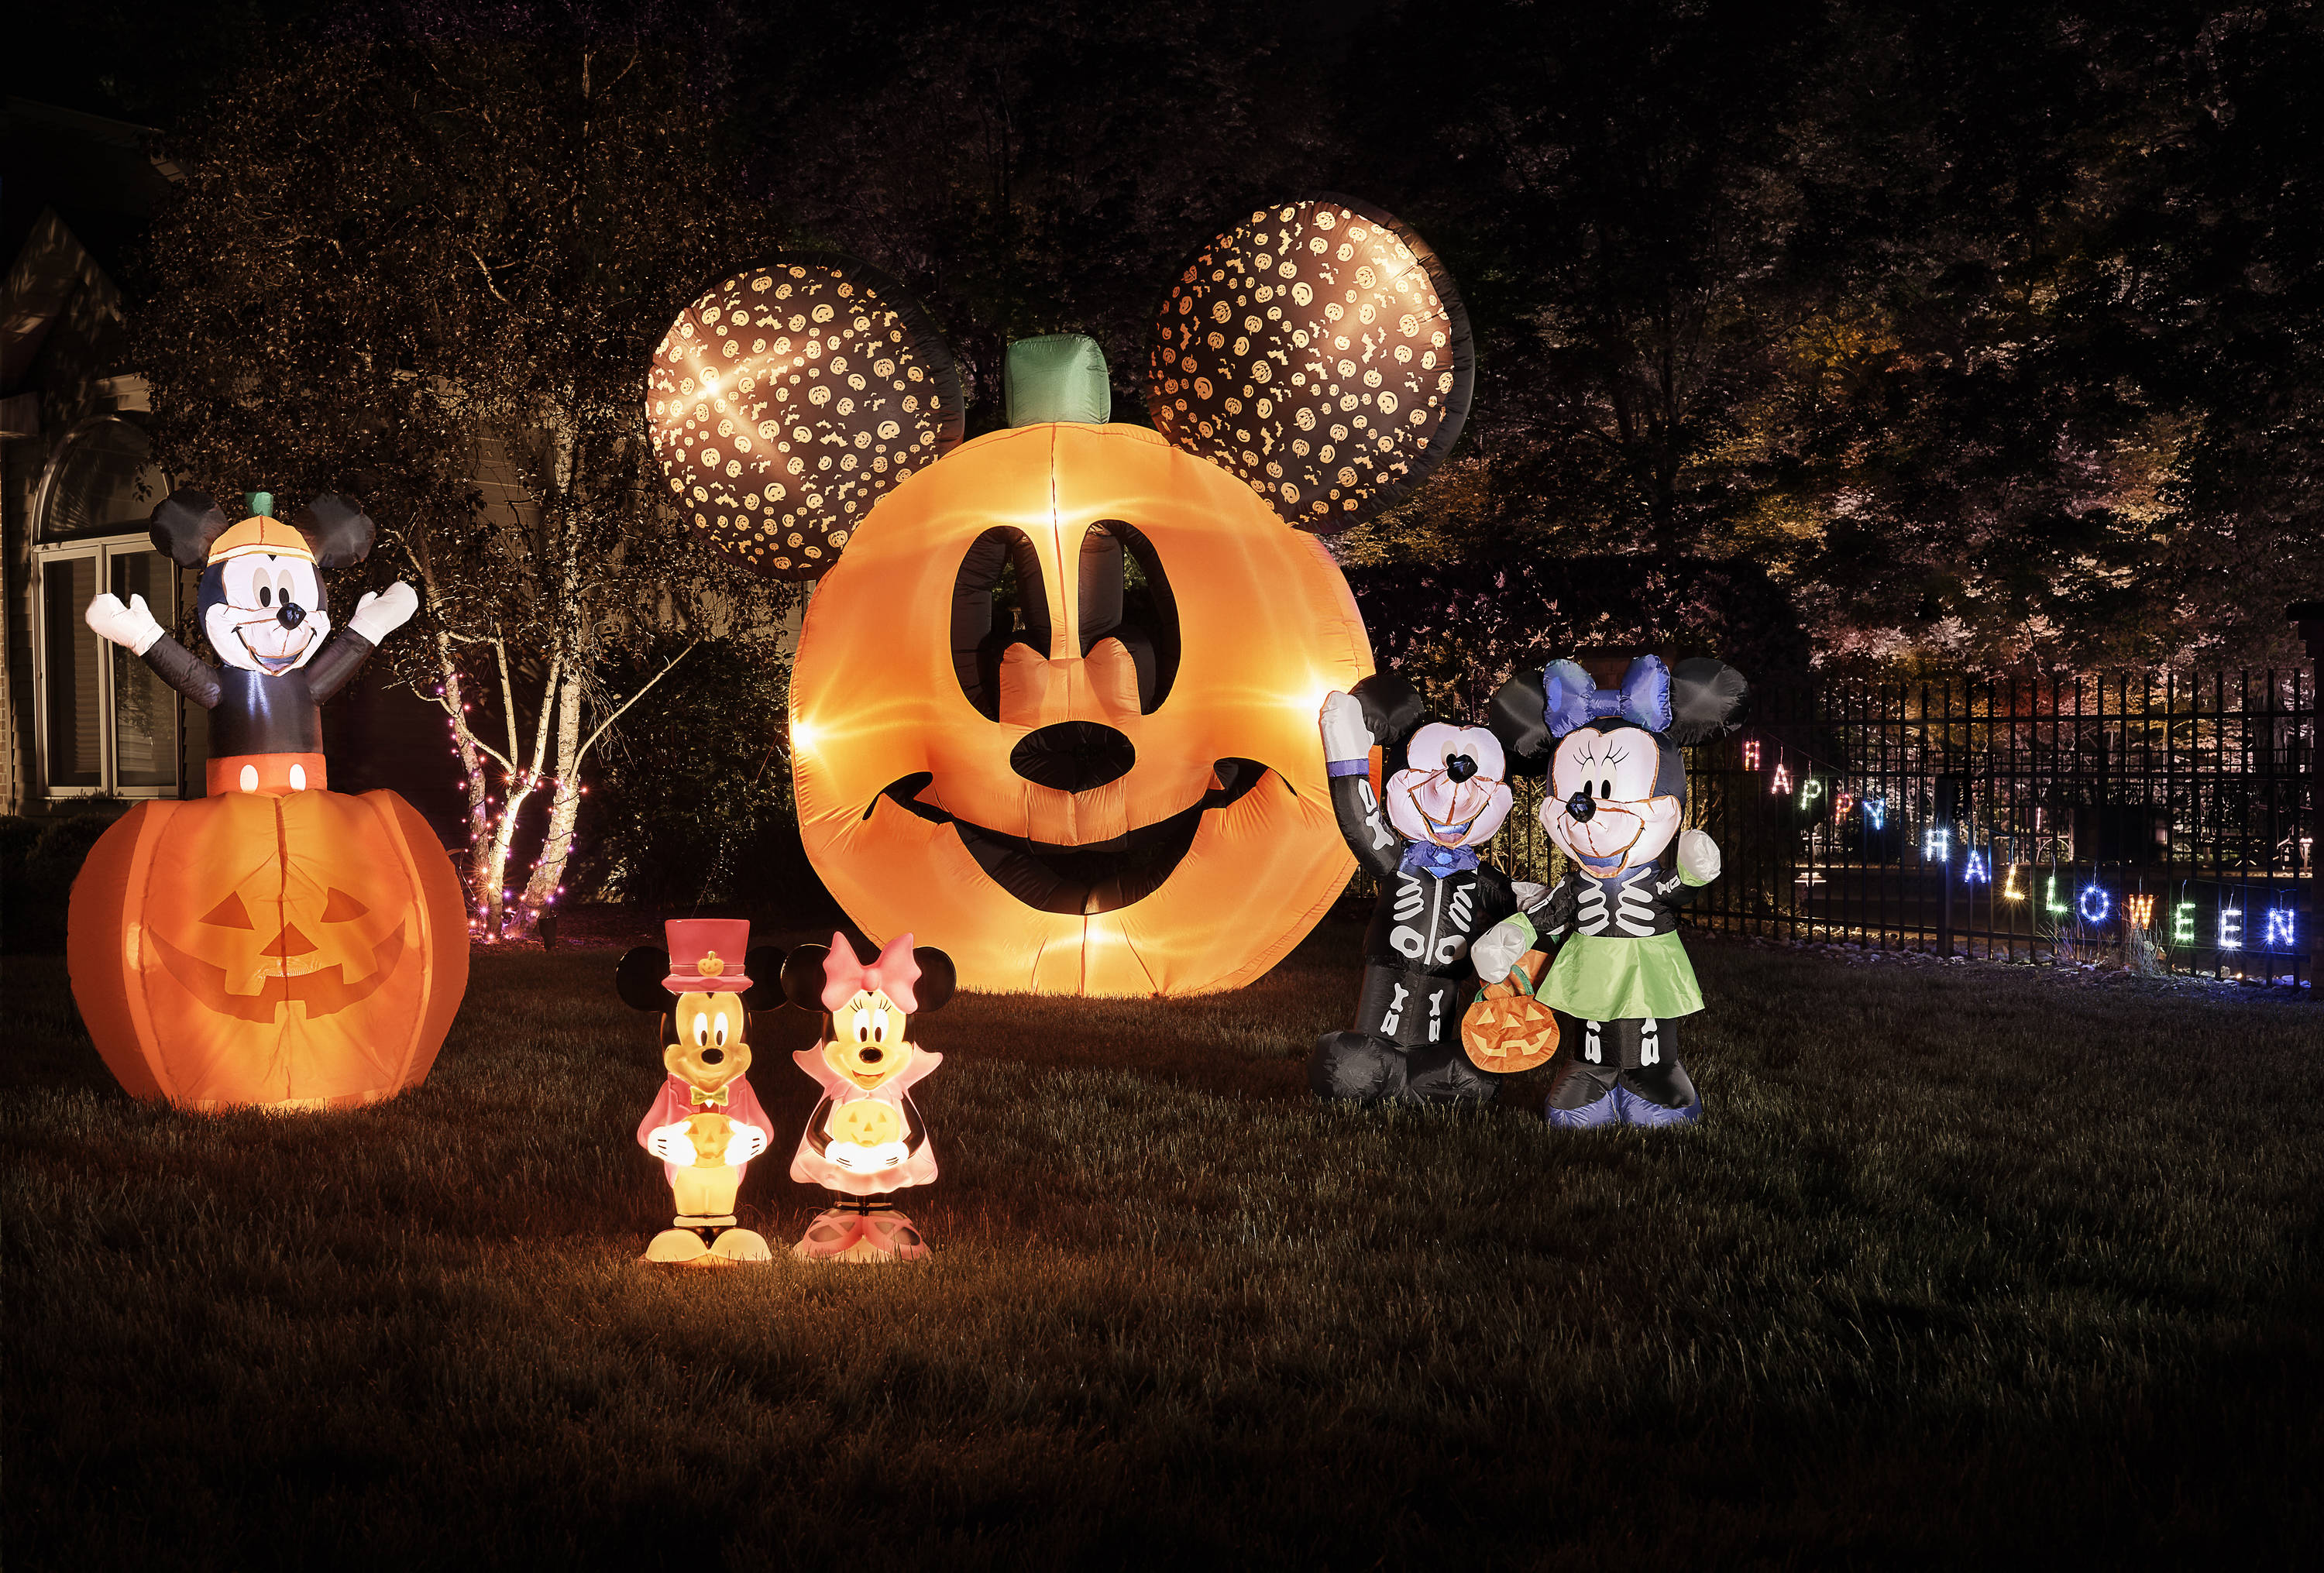 Stoney Disney Inspired Mickey Mouse Ghost or Minnie Mouse Pumpkin